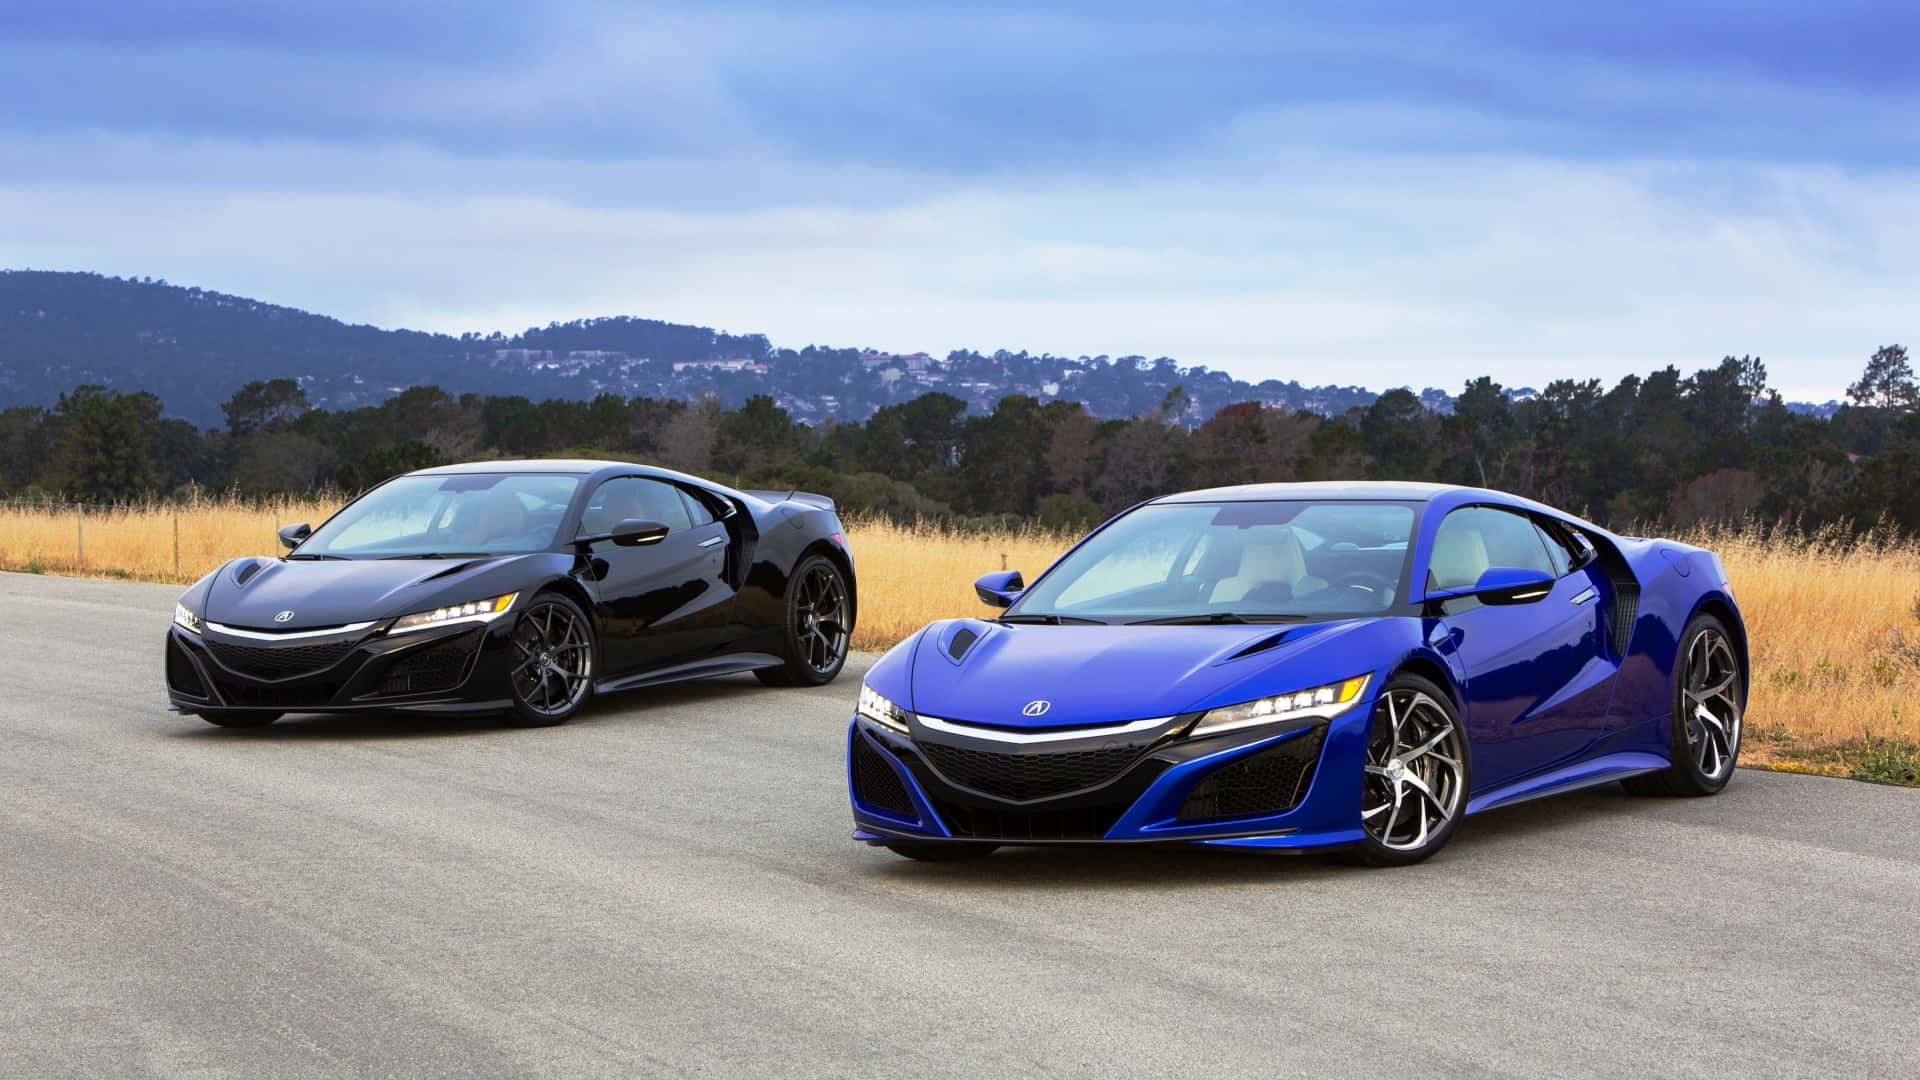 Sleek Acura NSX Sports Car in Action Wallpaper